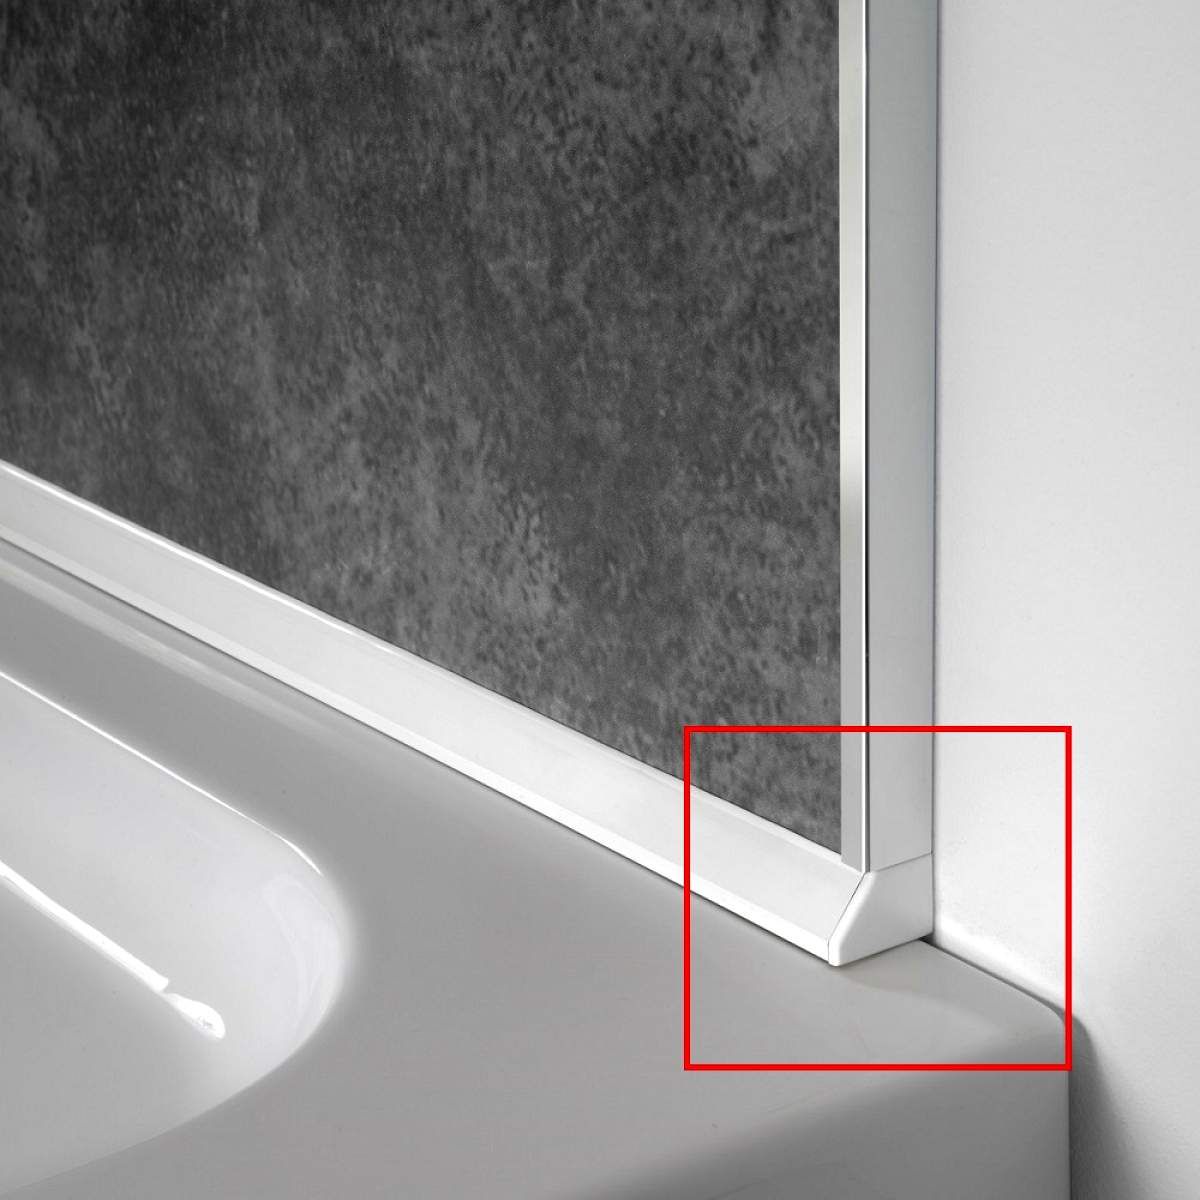 White Panel Trim Perfect For Bathroom Kitchen Shower Wall PVC Cladding Panels-10mm End Cap Edging Trim-100% Waterproof-Use with Claddtech Adhesive